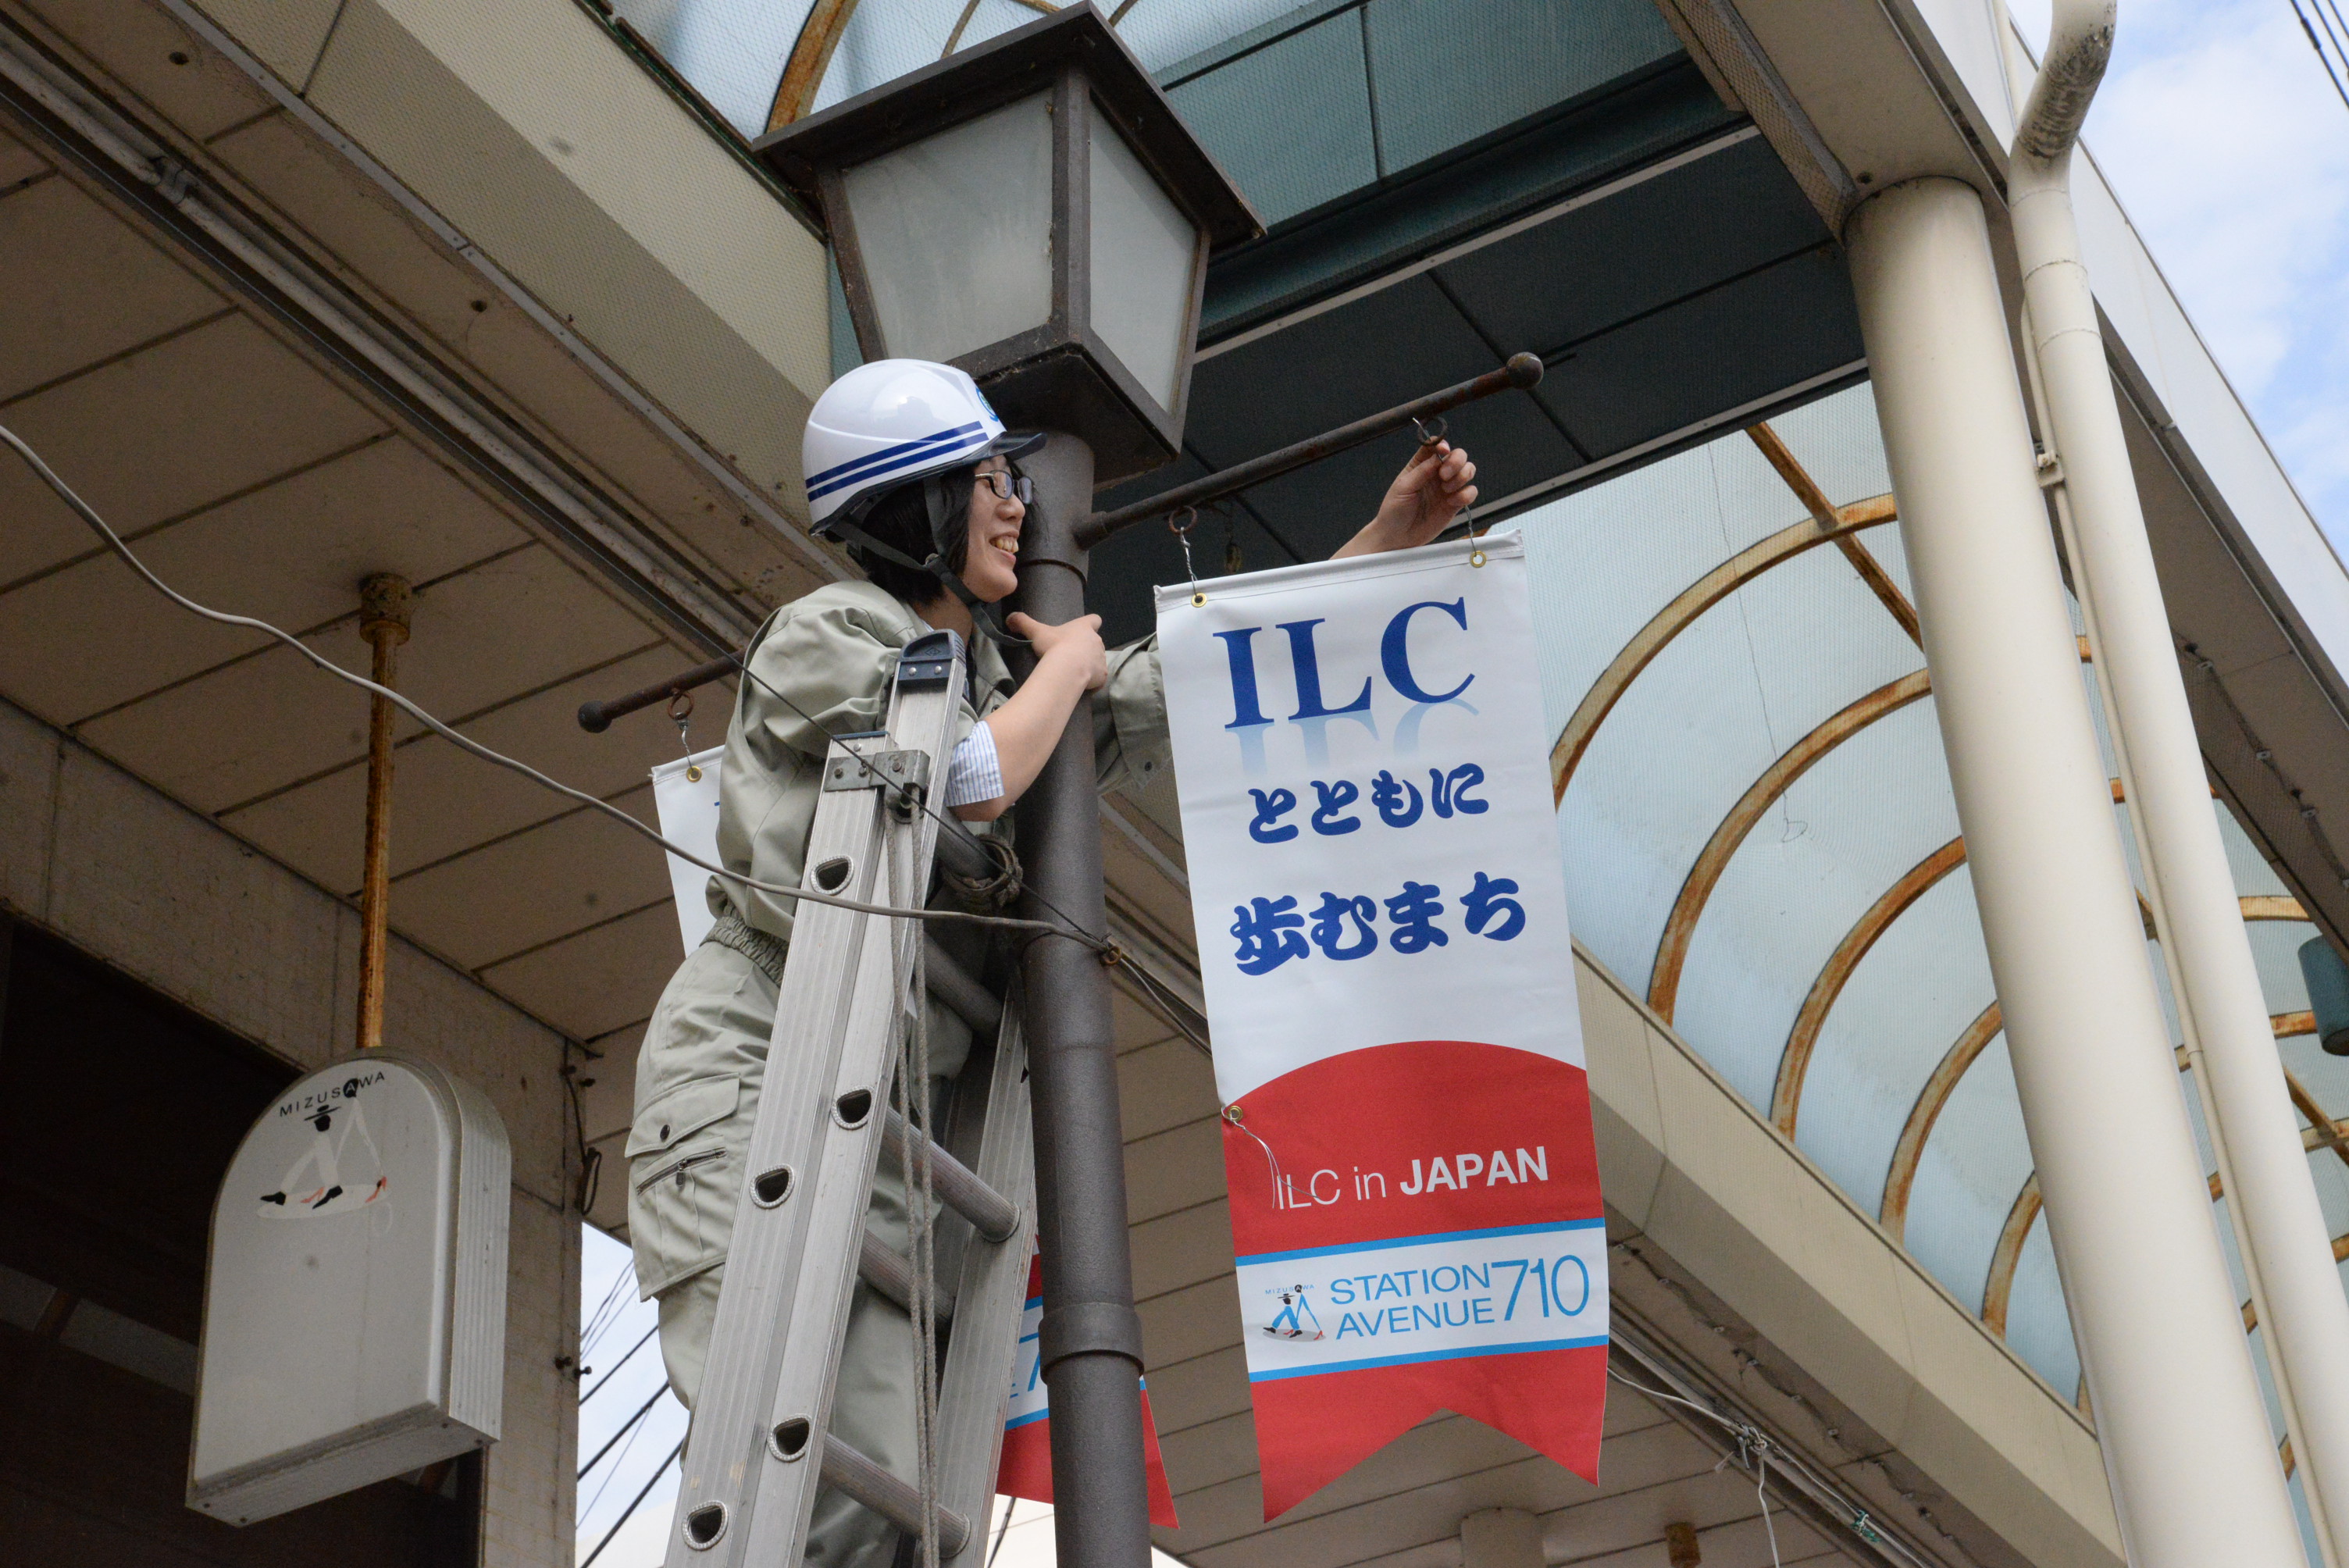 ILC Promotion Division staff member Mai Goto braves heights and spiders for the ILC